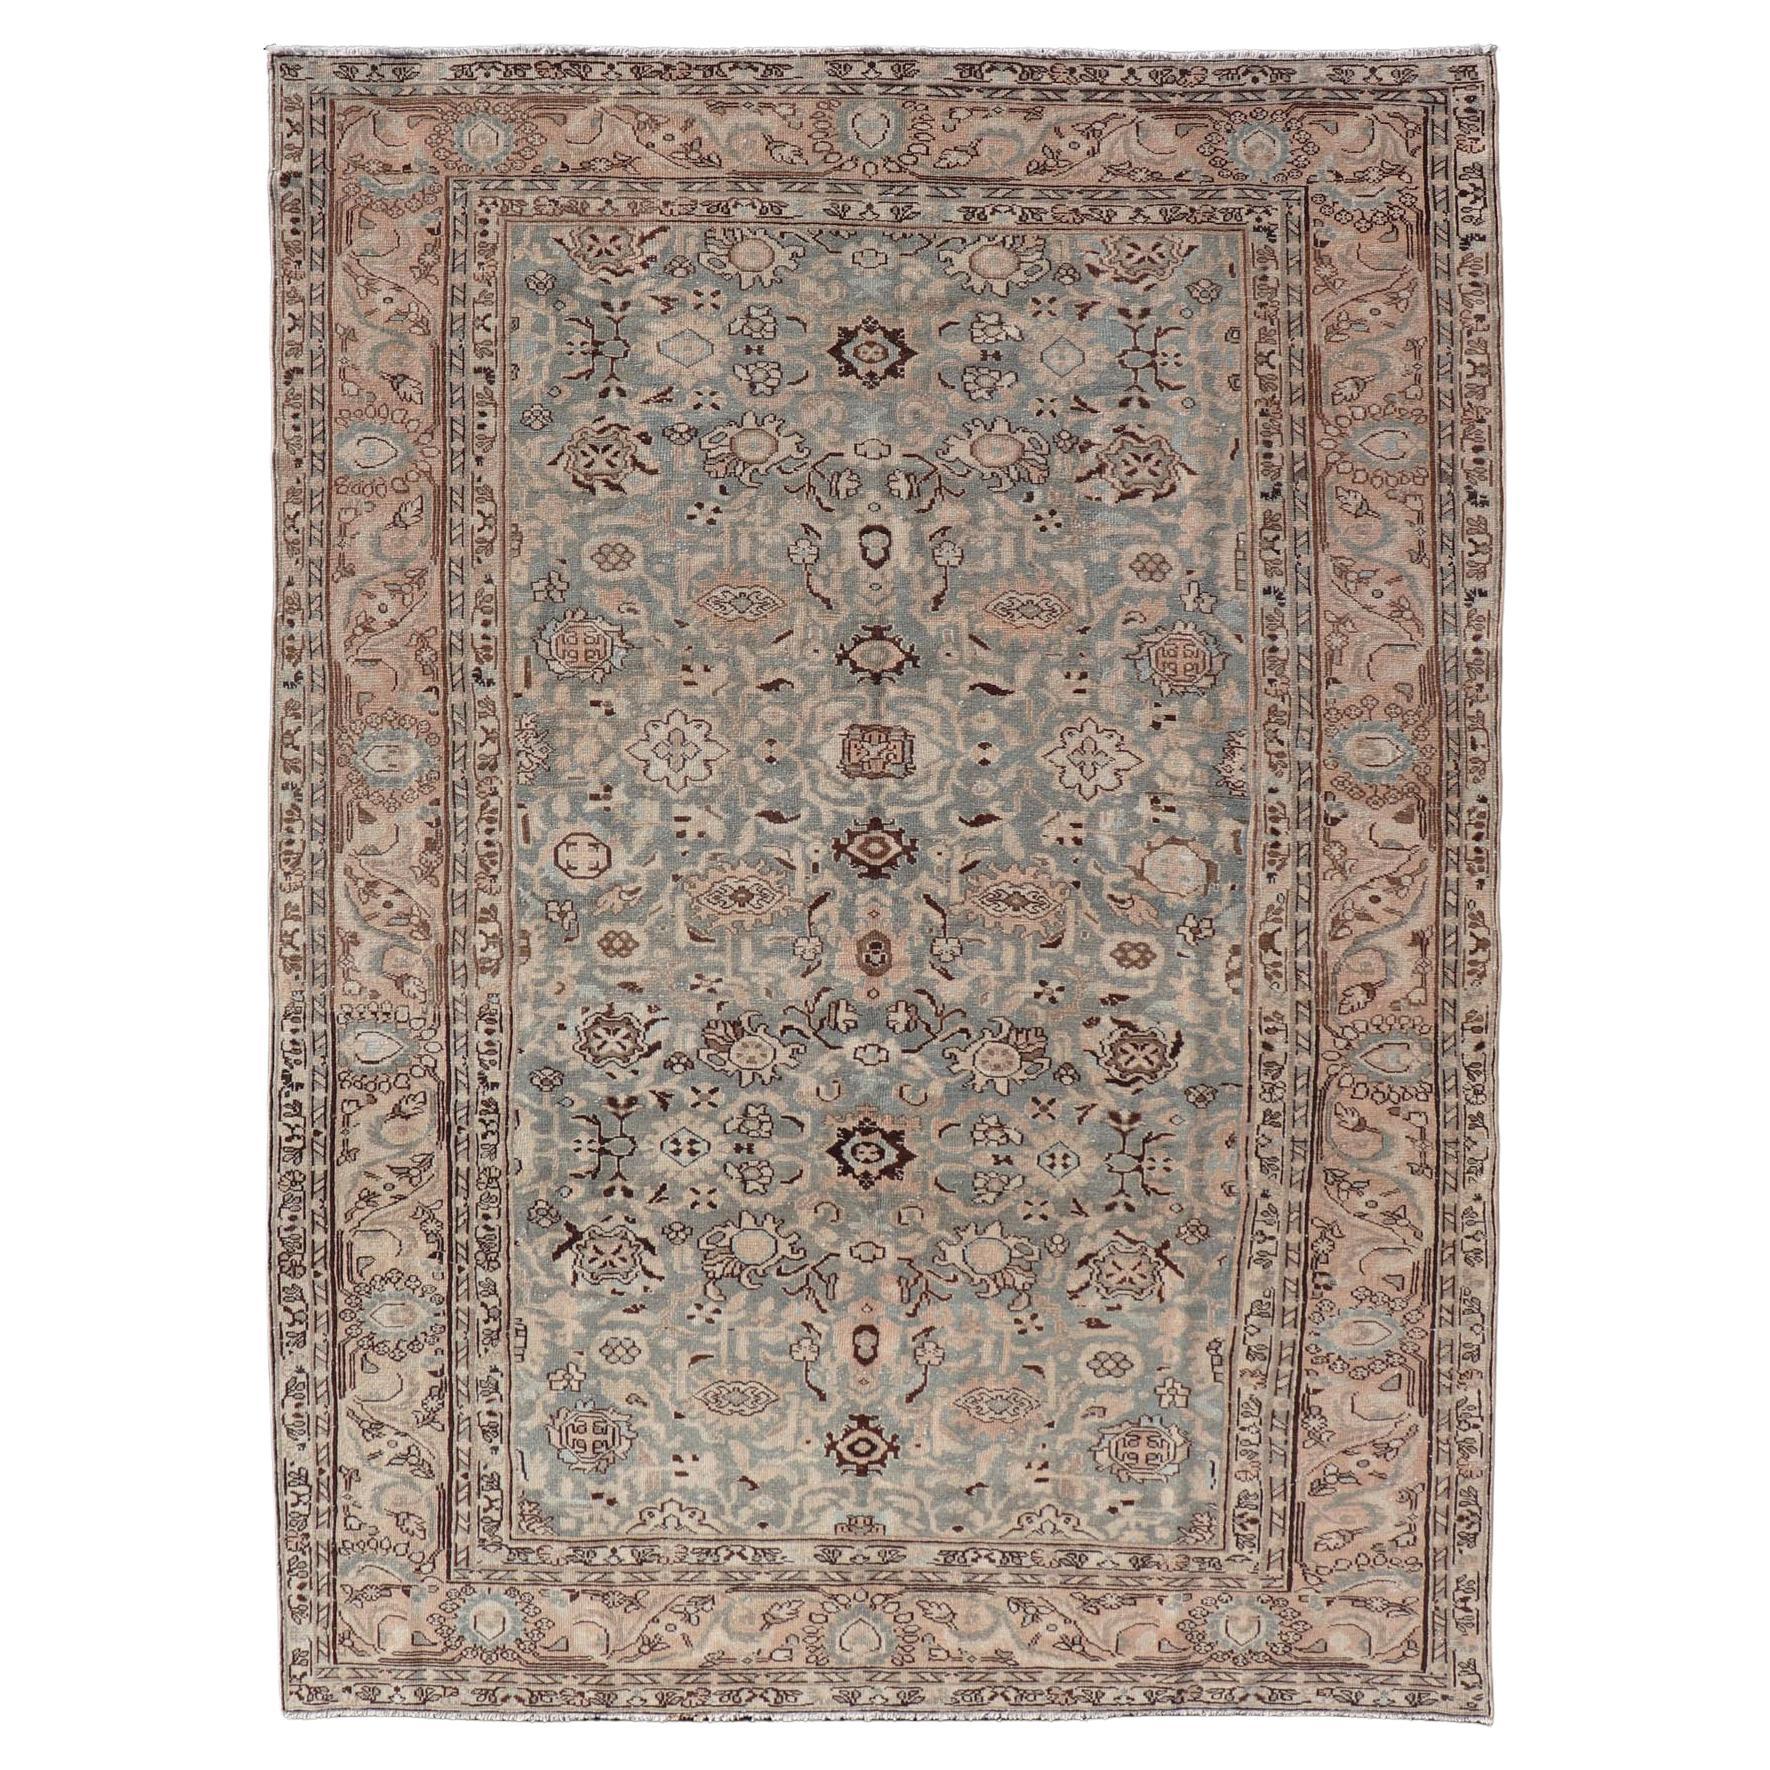 All-Over Floral Antique Persian Hamadan Rug in Gray Green, Peach & Earth Tones For Sale